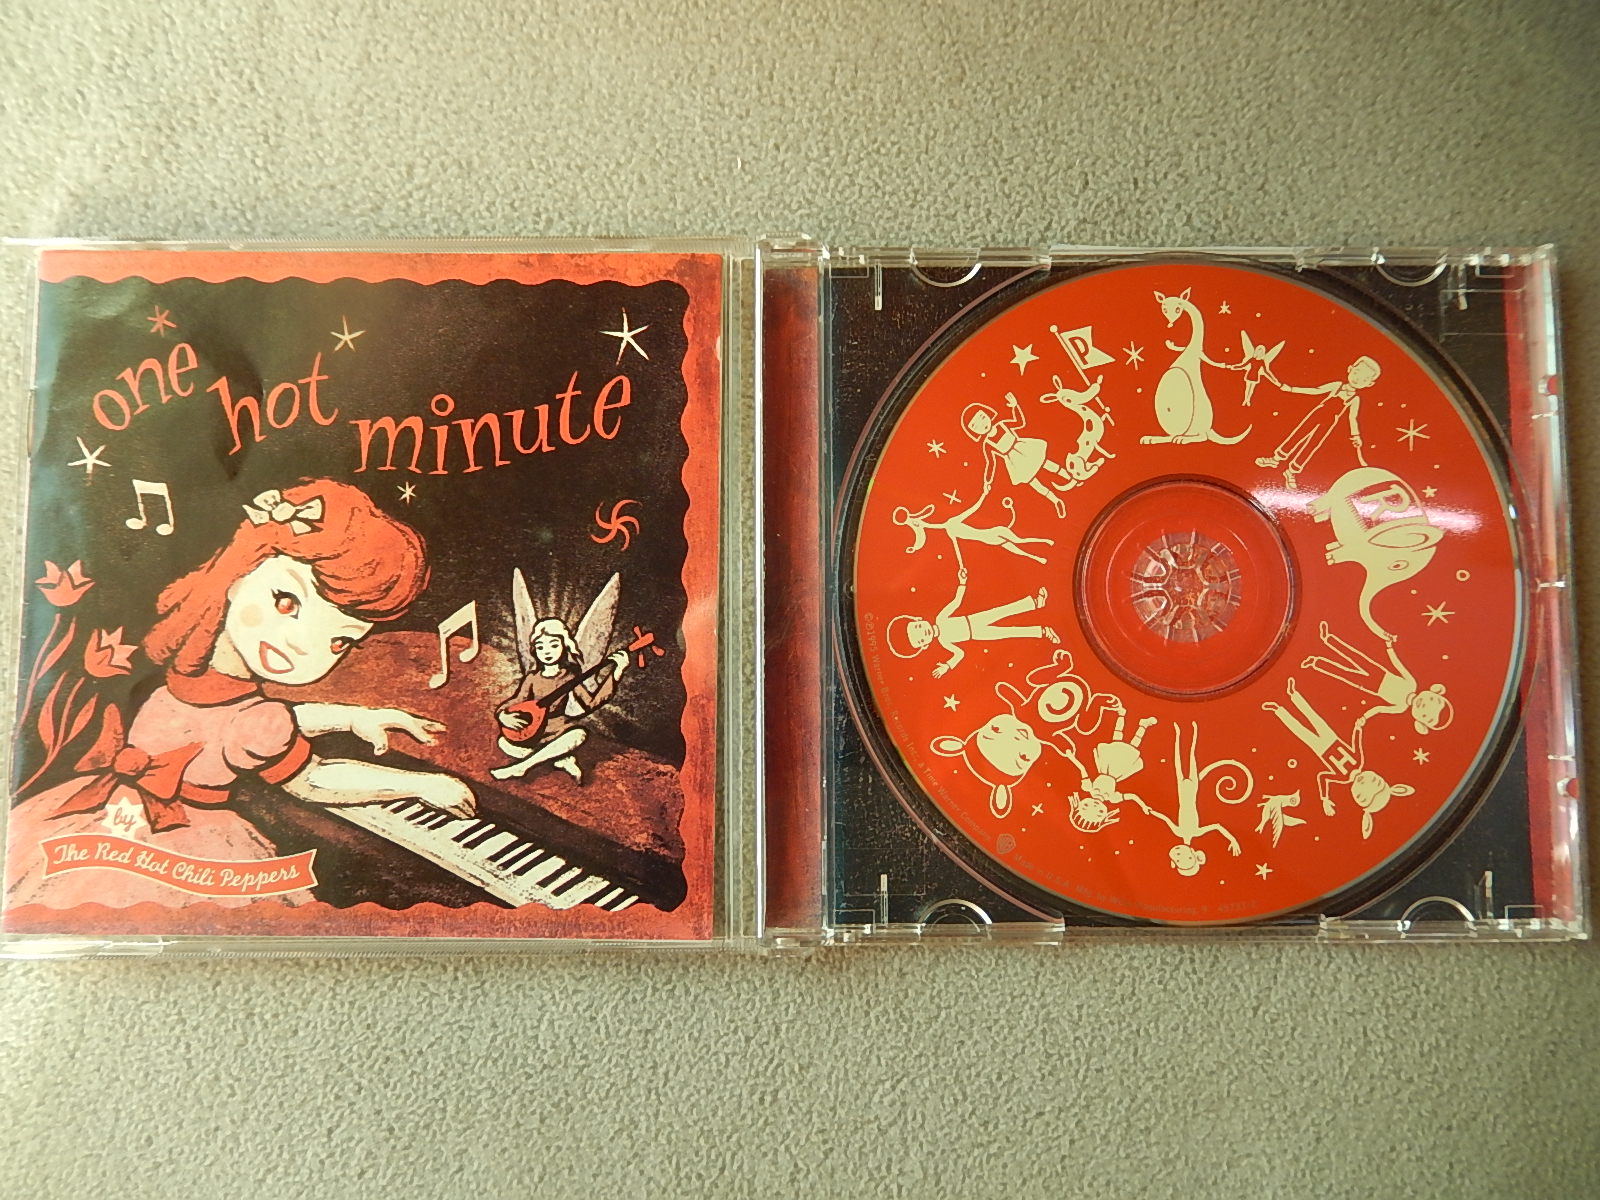 Original CD, Brazilian version of crazy metal red pepper band red hot chili peppers